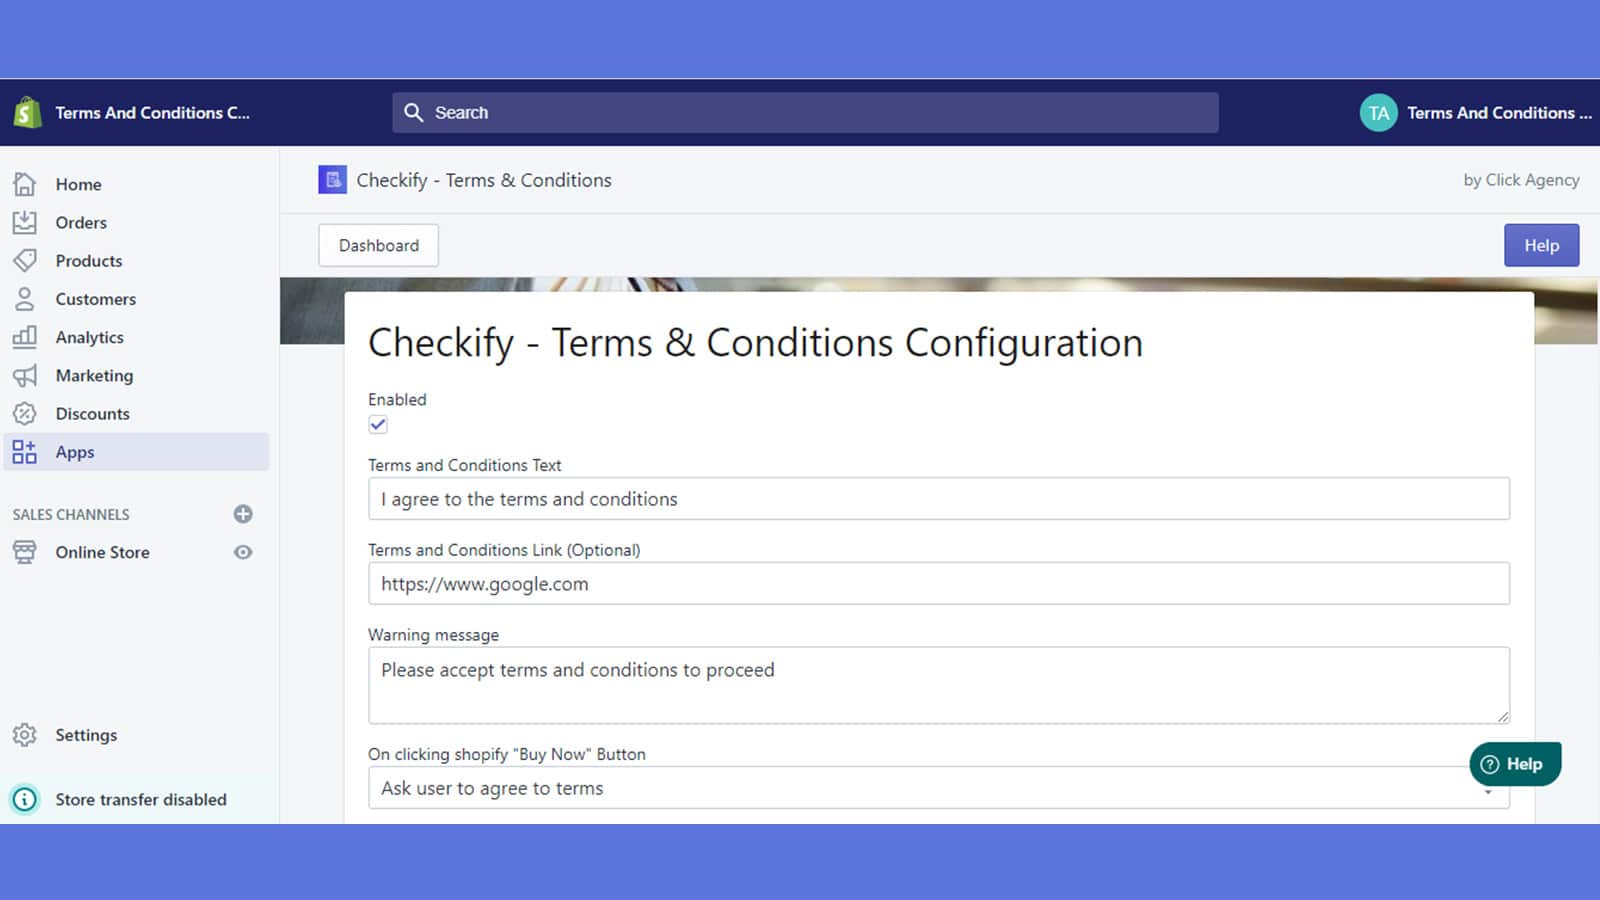 Checkify ‑ Terms & Conditions